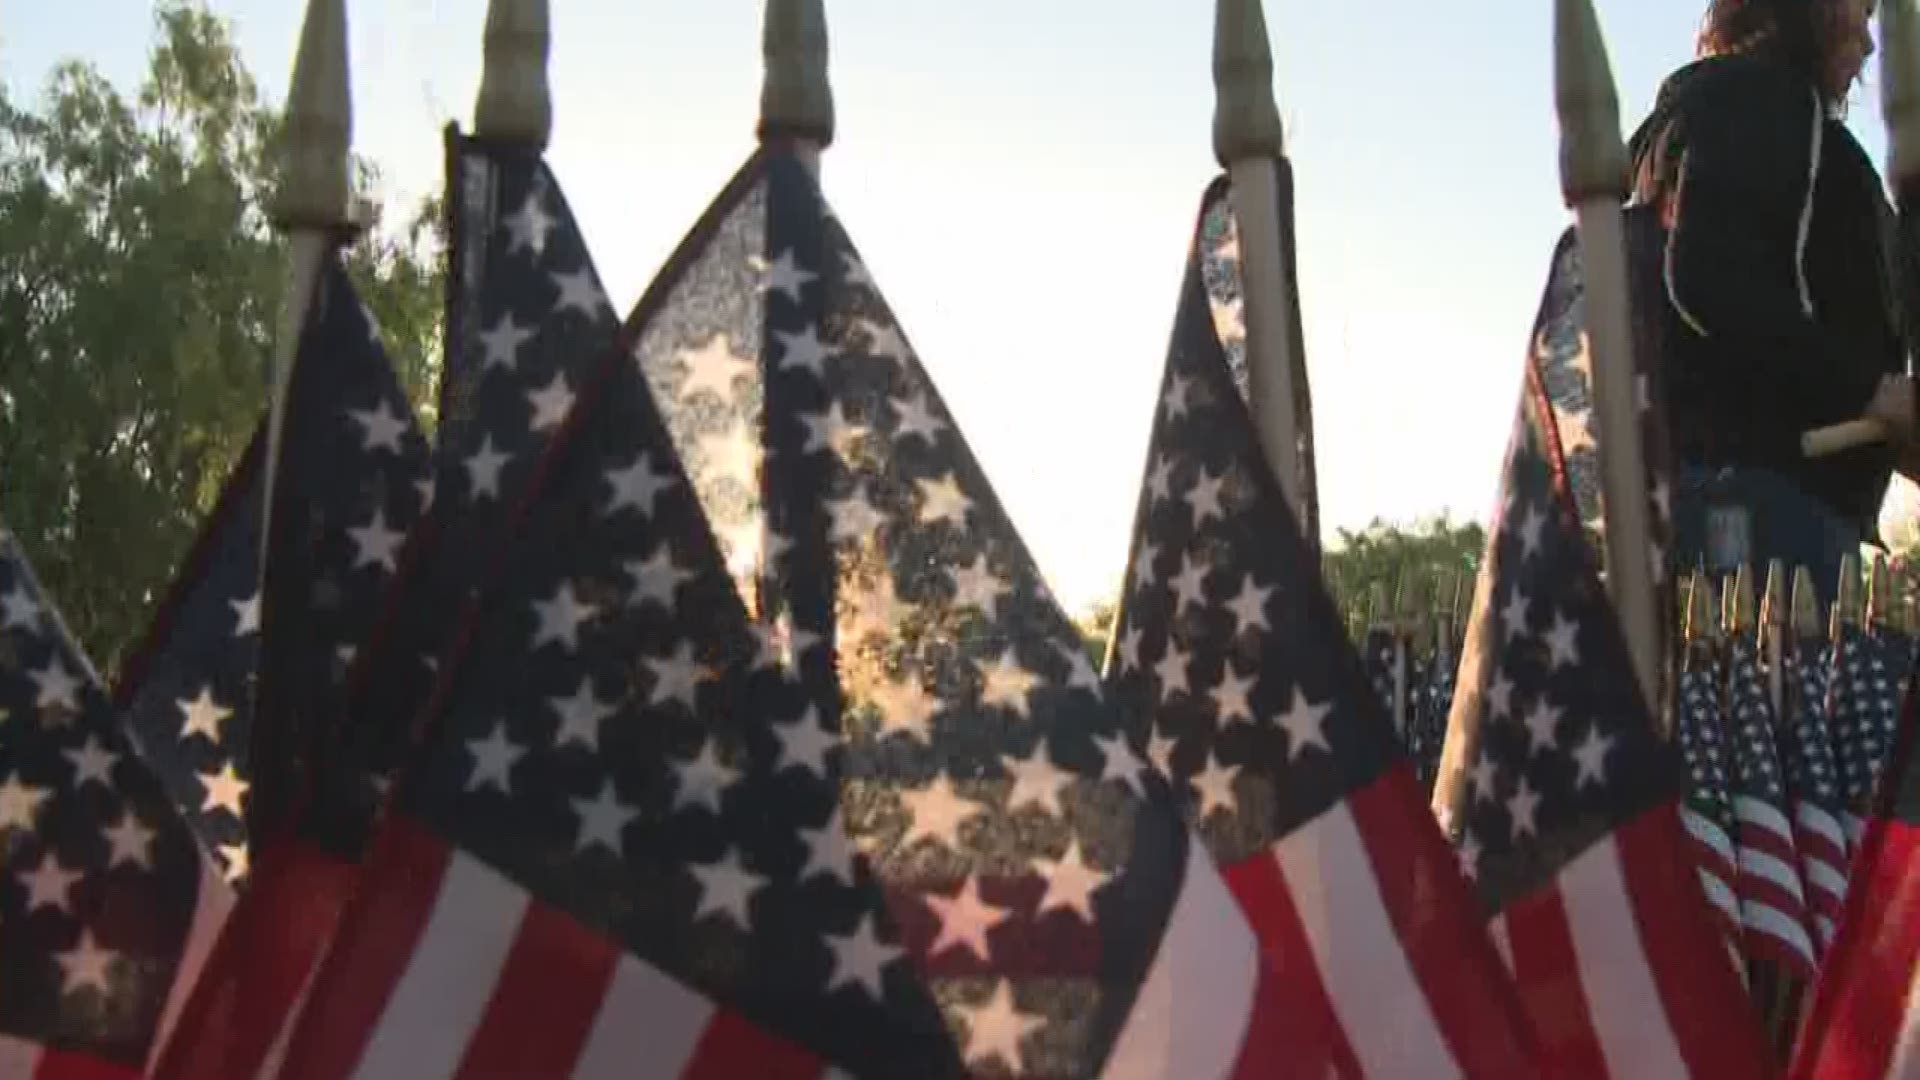 Volunteers from University of Phoenix have planted 10,000 American flags as a symbol of appreciation.